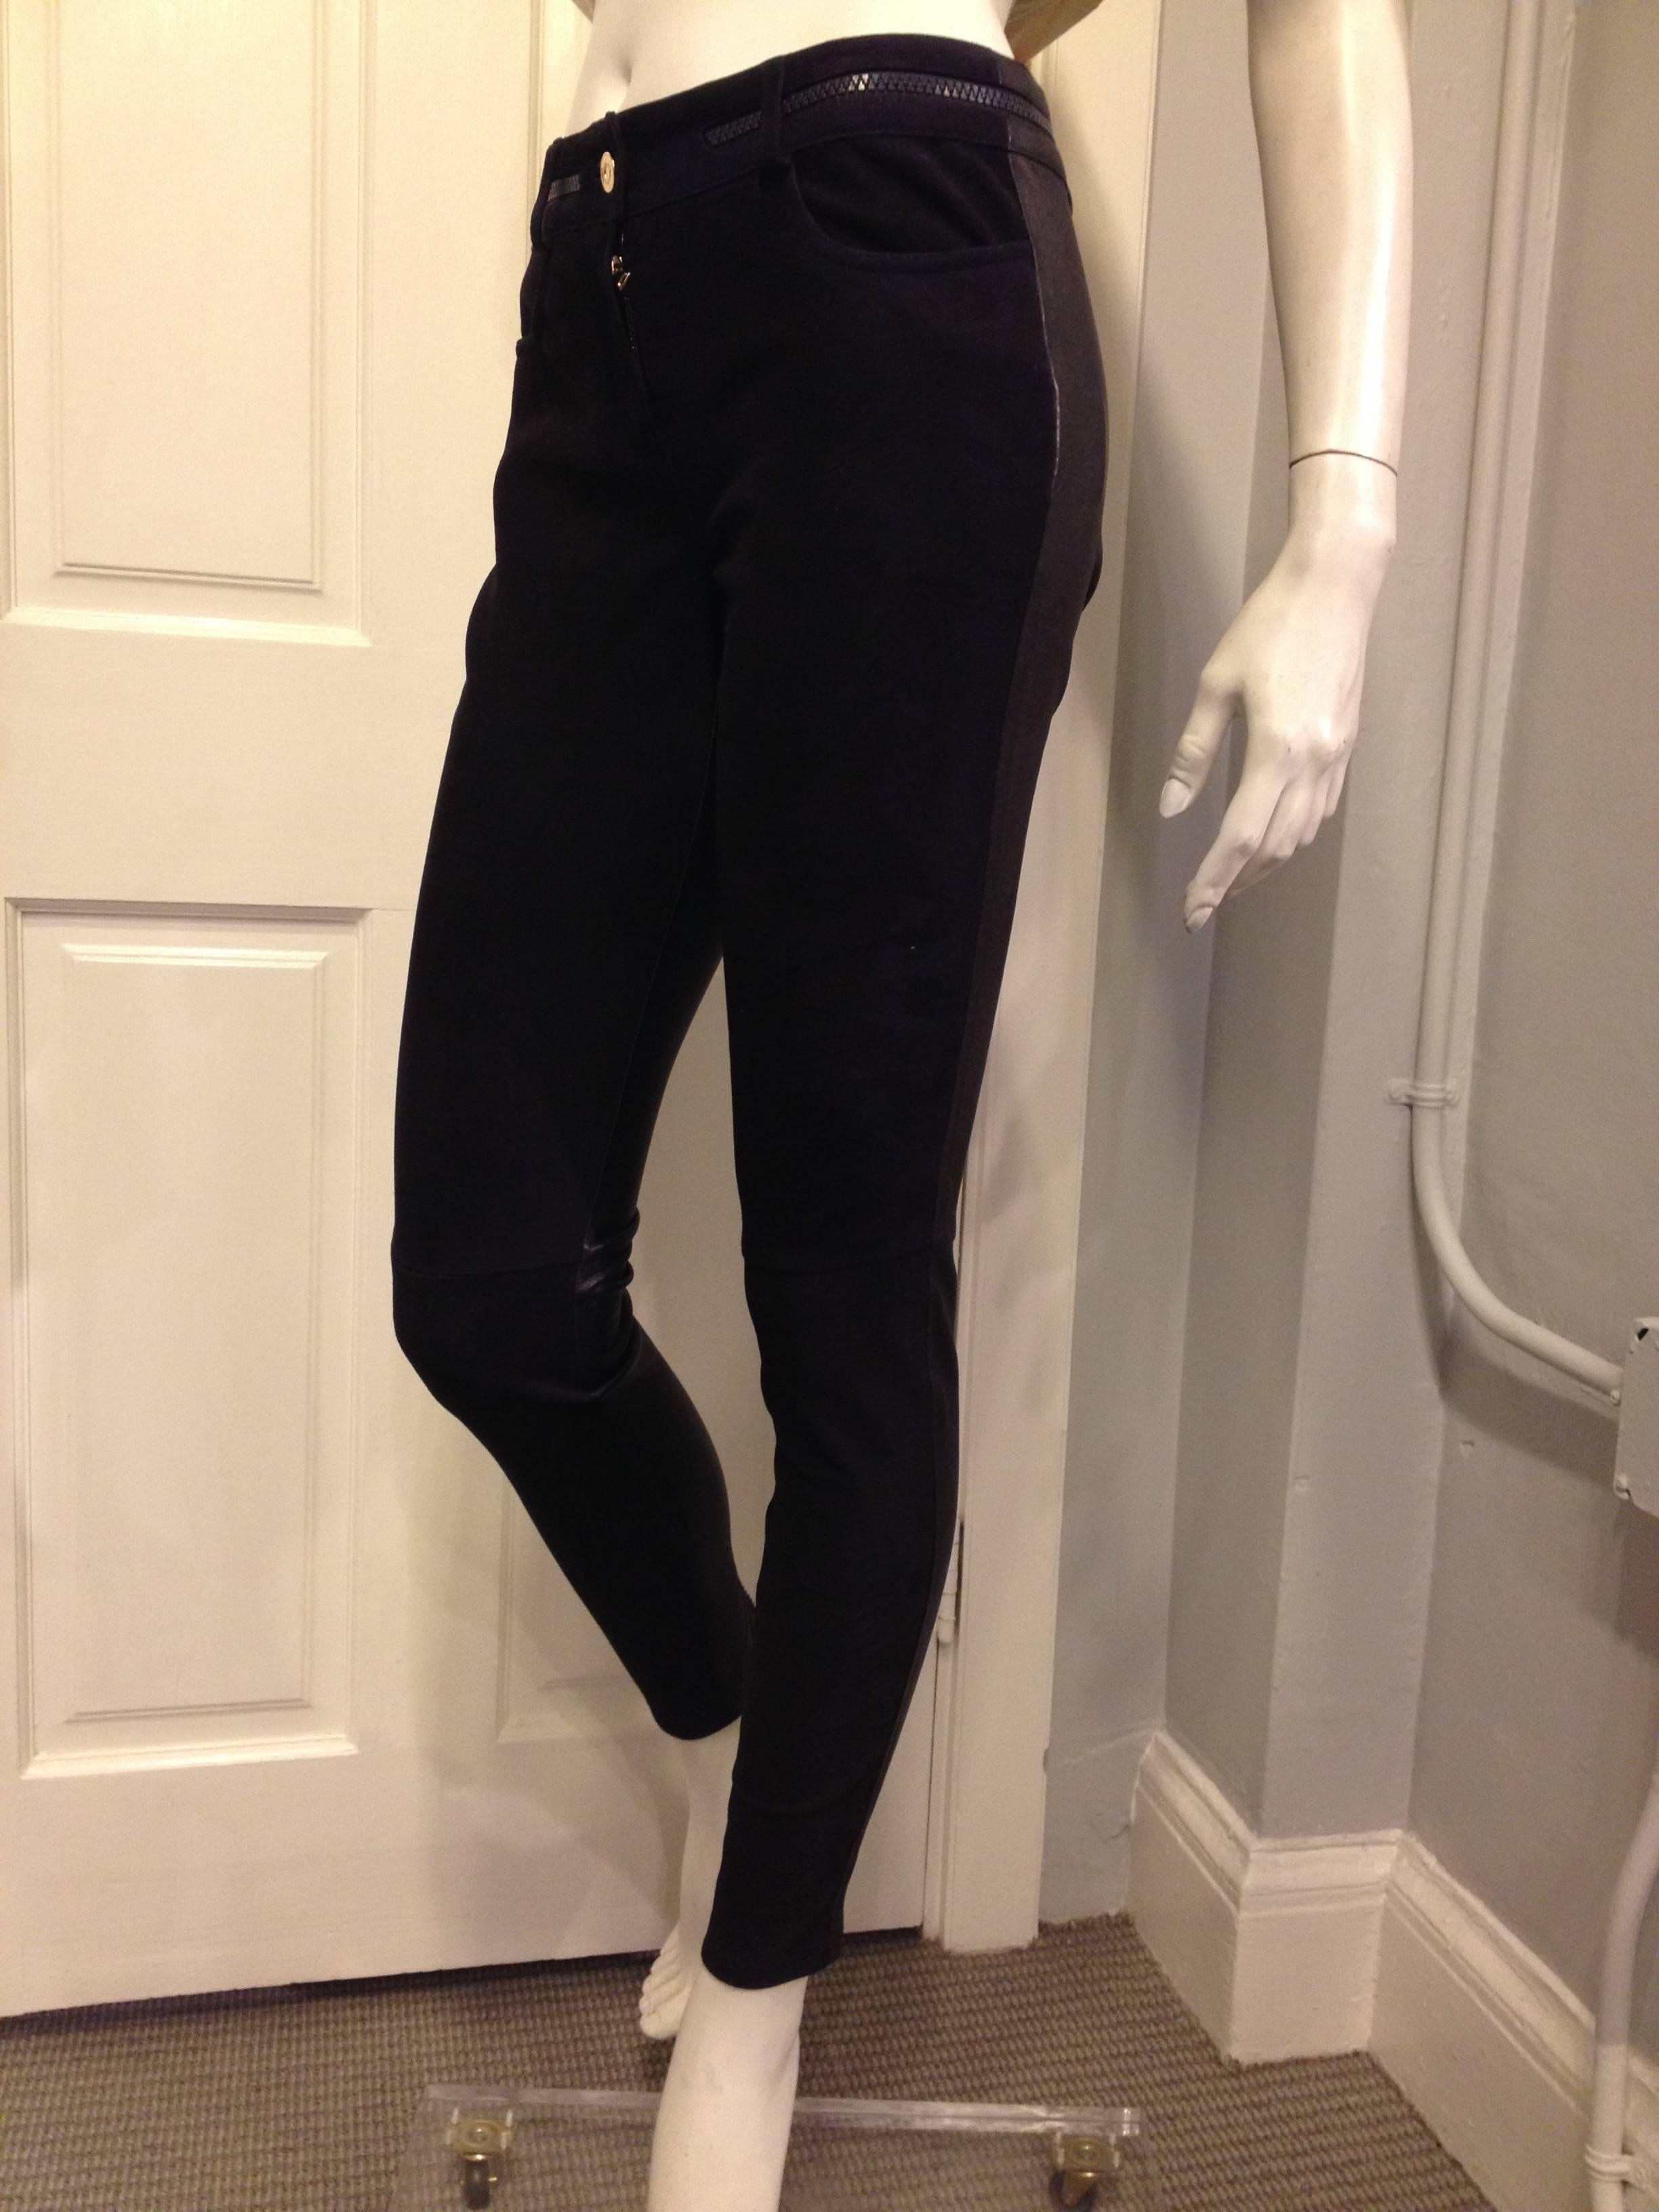 The leather legging is such a staple for day and night - comfortable and stylish, they work just as well at the cafe for lunch as they do for drinks on the weekend. This two-toned pair features a glossy black leather backing and an ultrasoft navy